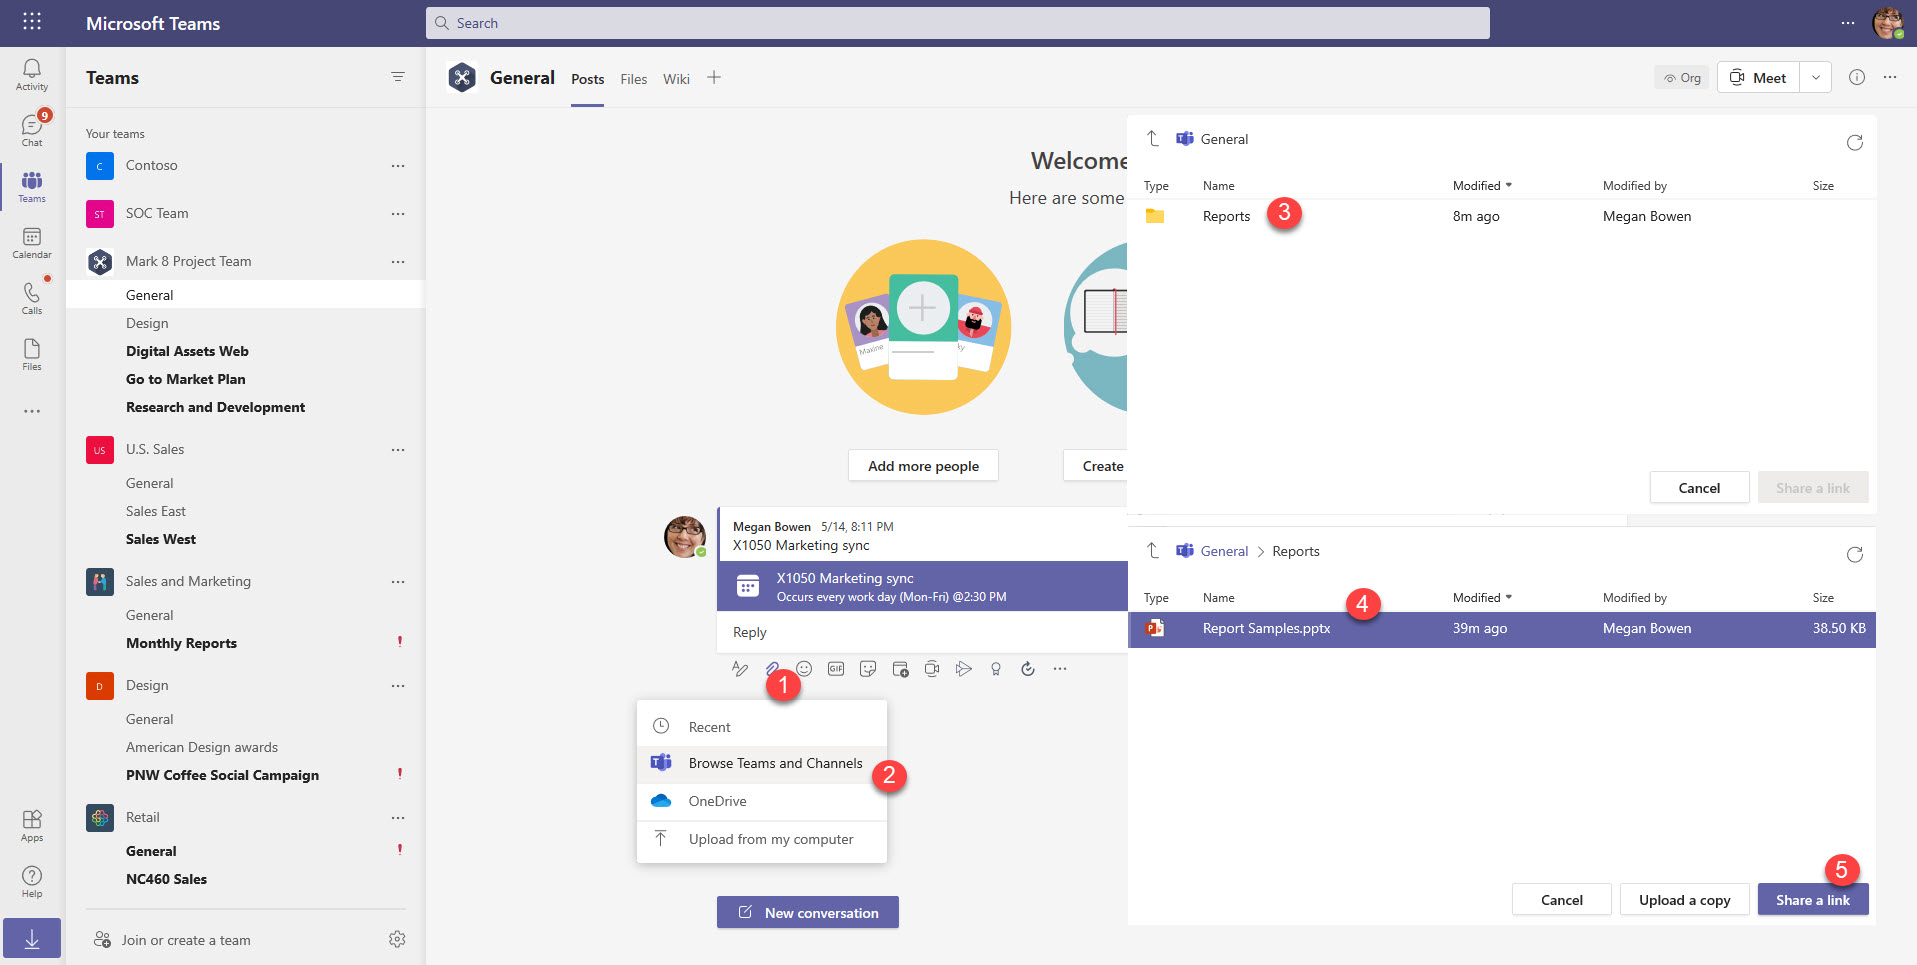 How to upload a document in the folder in Files tab in Microsoft Teams